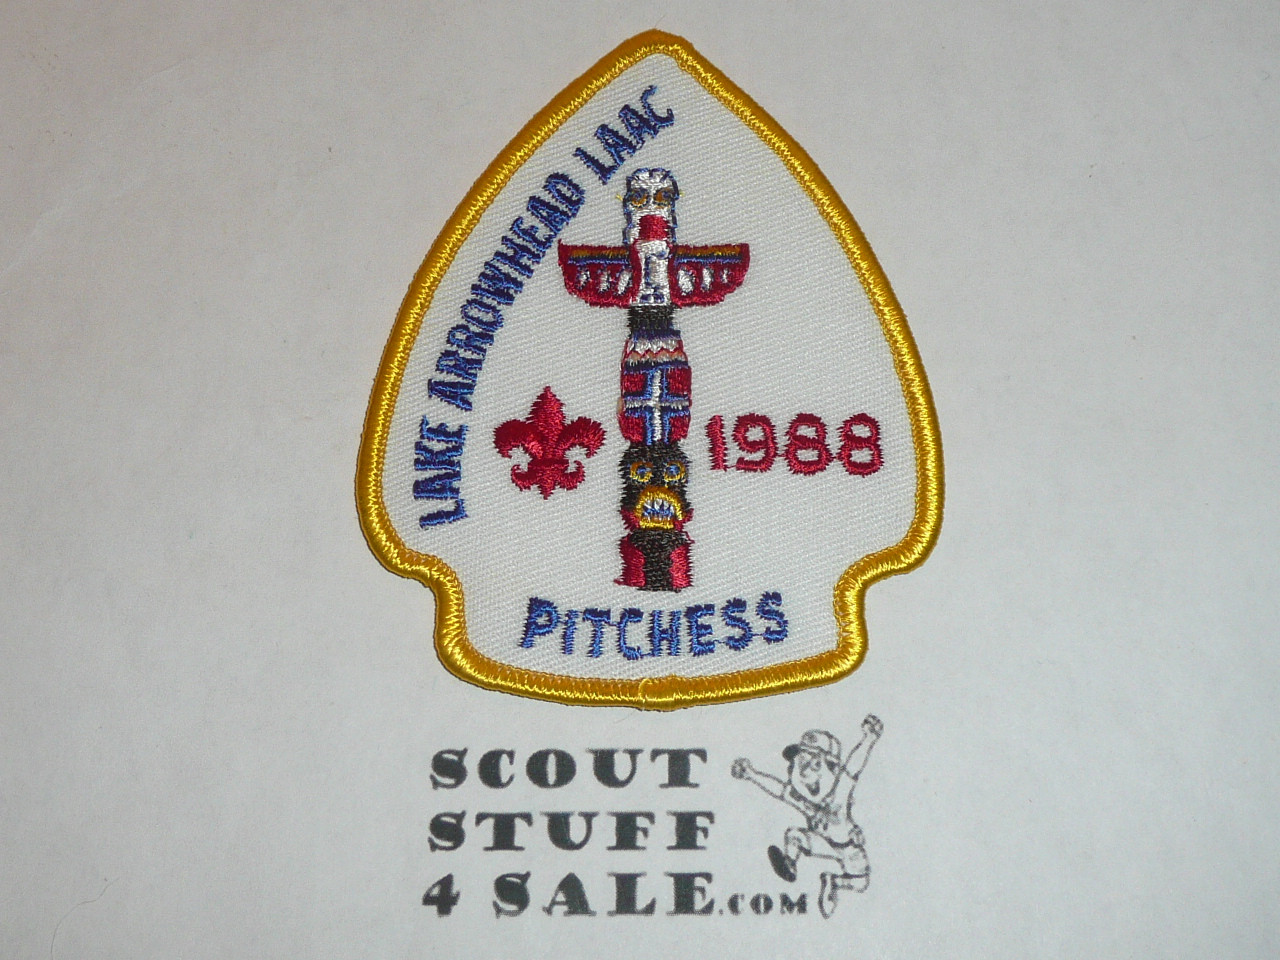 Lake Arrowhead Scout Camps, Camp Pitchess Patch, 1988